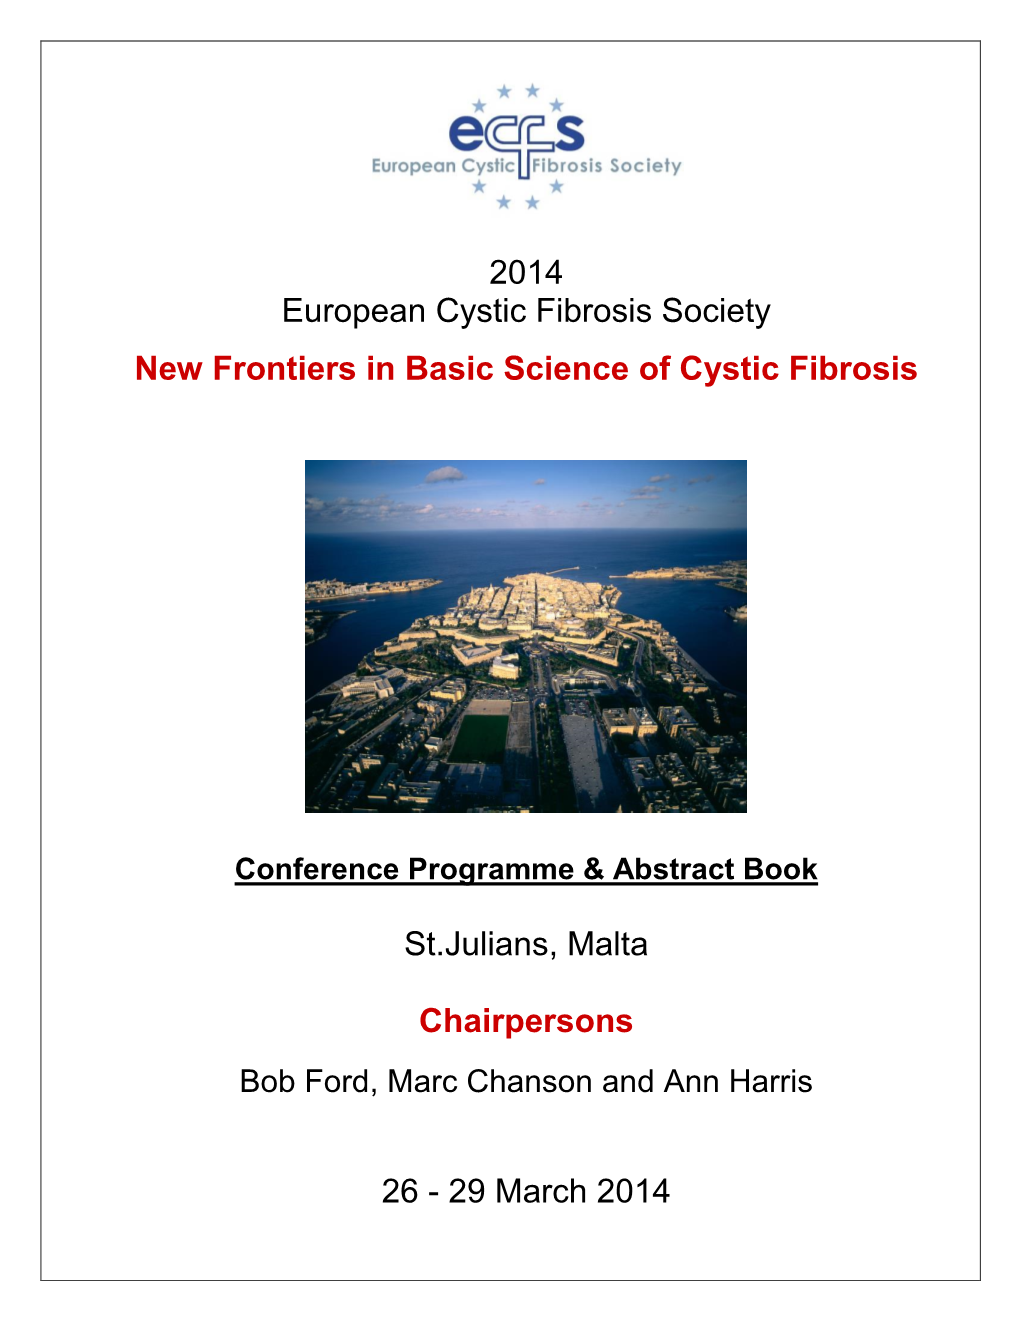 New Frontiers in Basic Science of Cystic Fibrosis